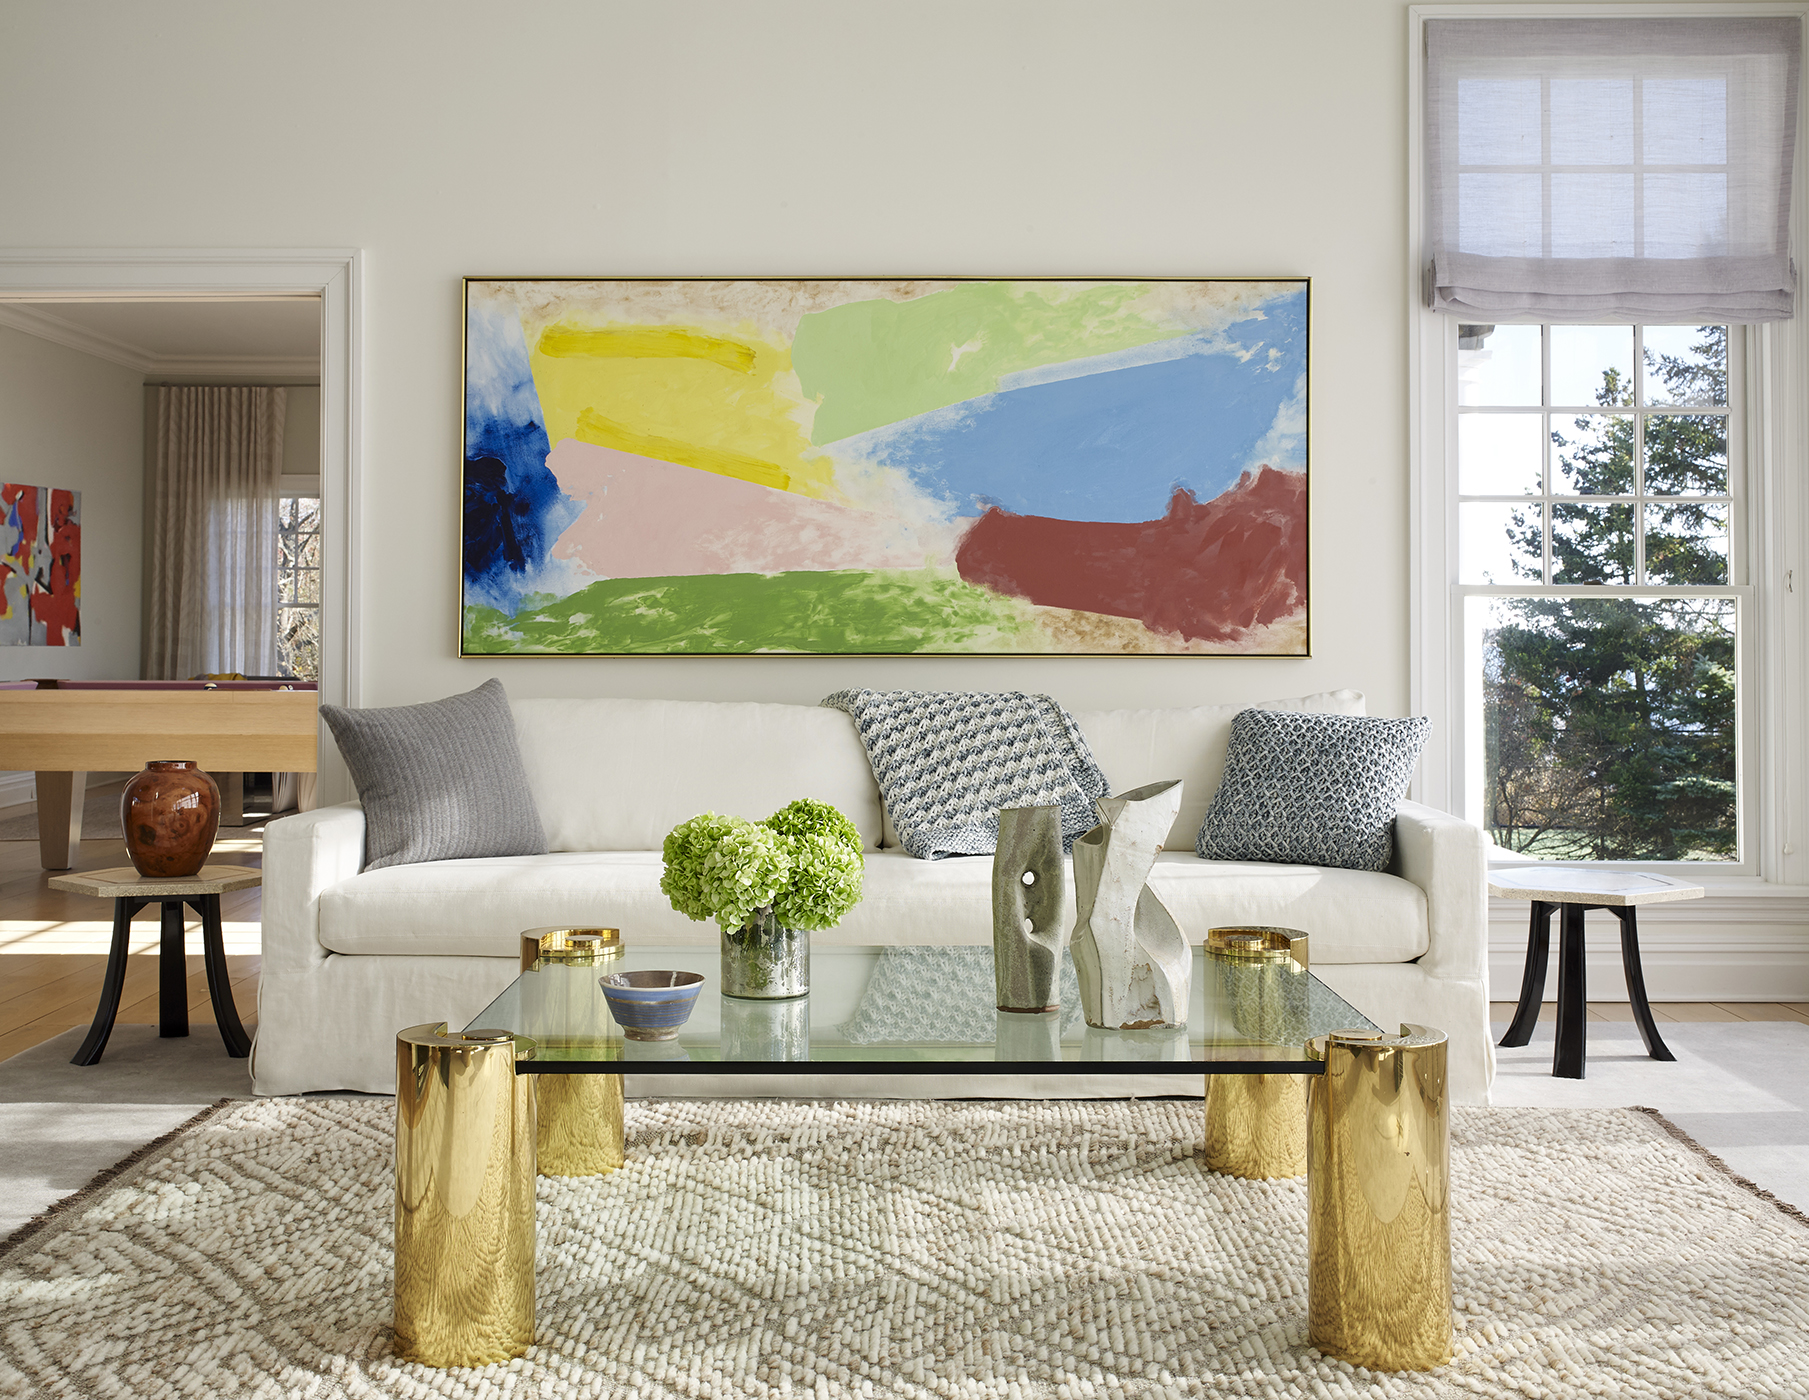 A Living Room with a white sofa, a glass table with golden legs, and a colorful painting.